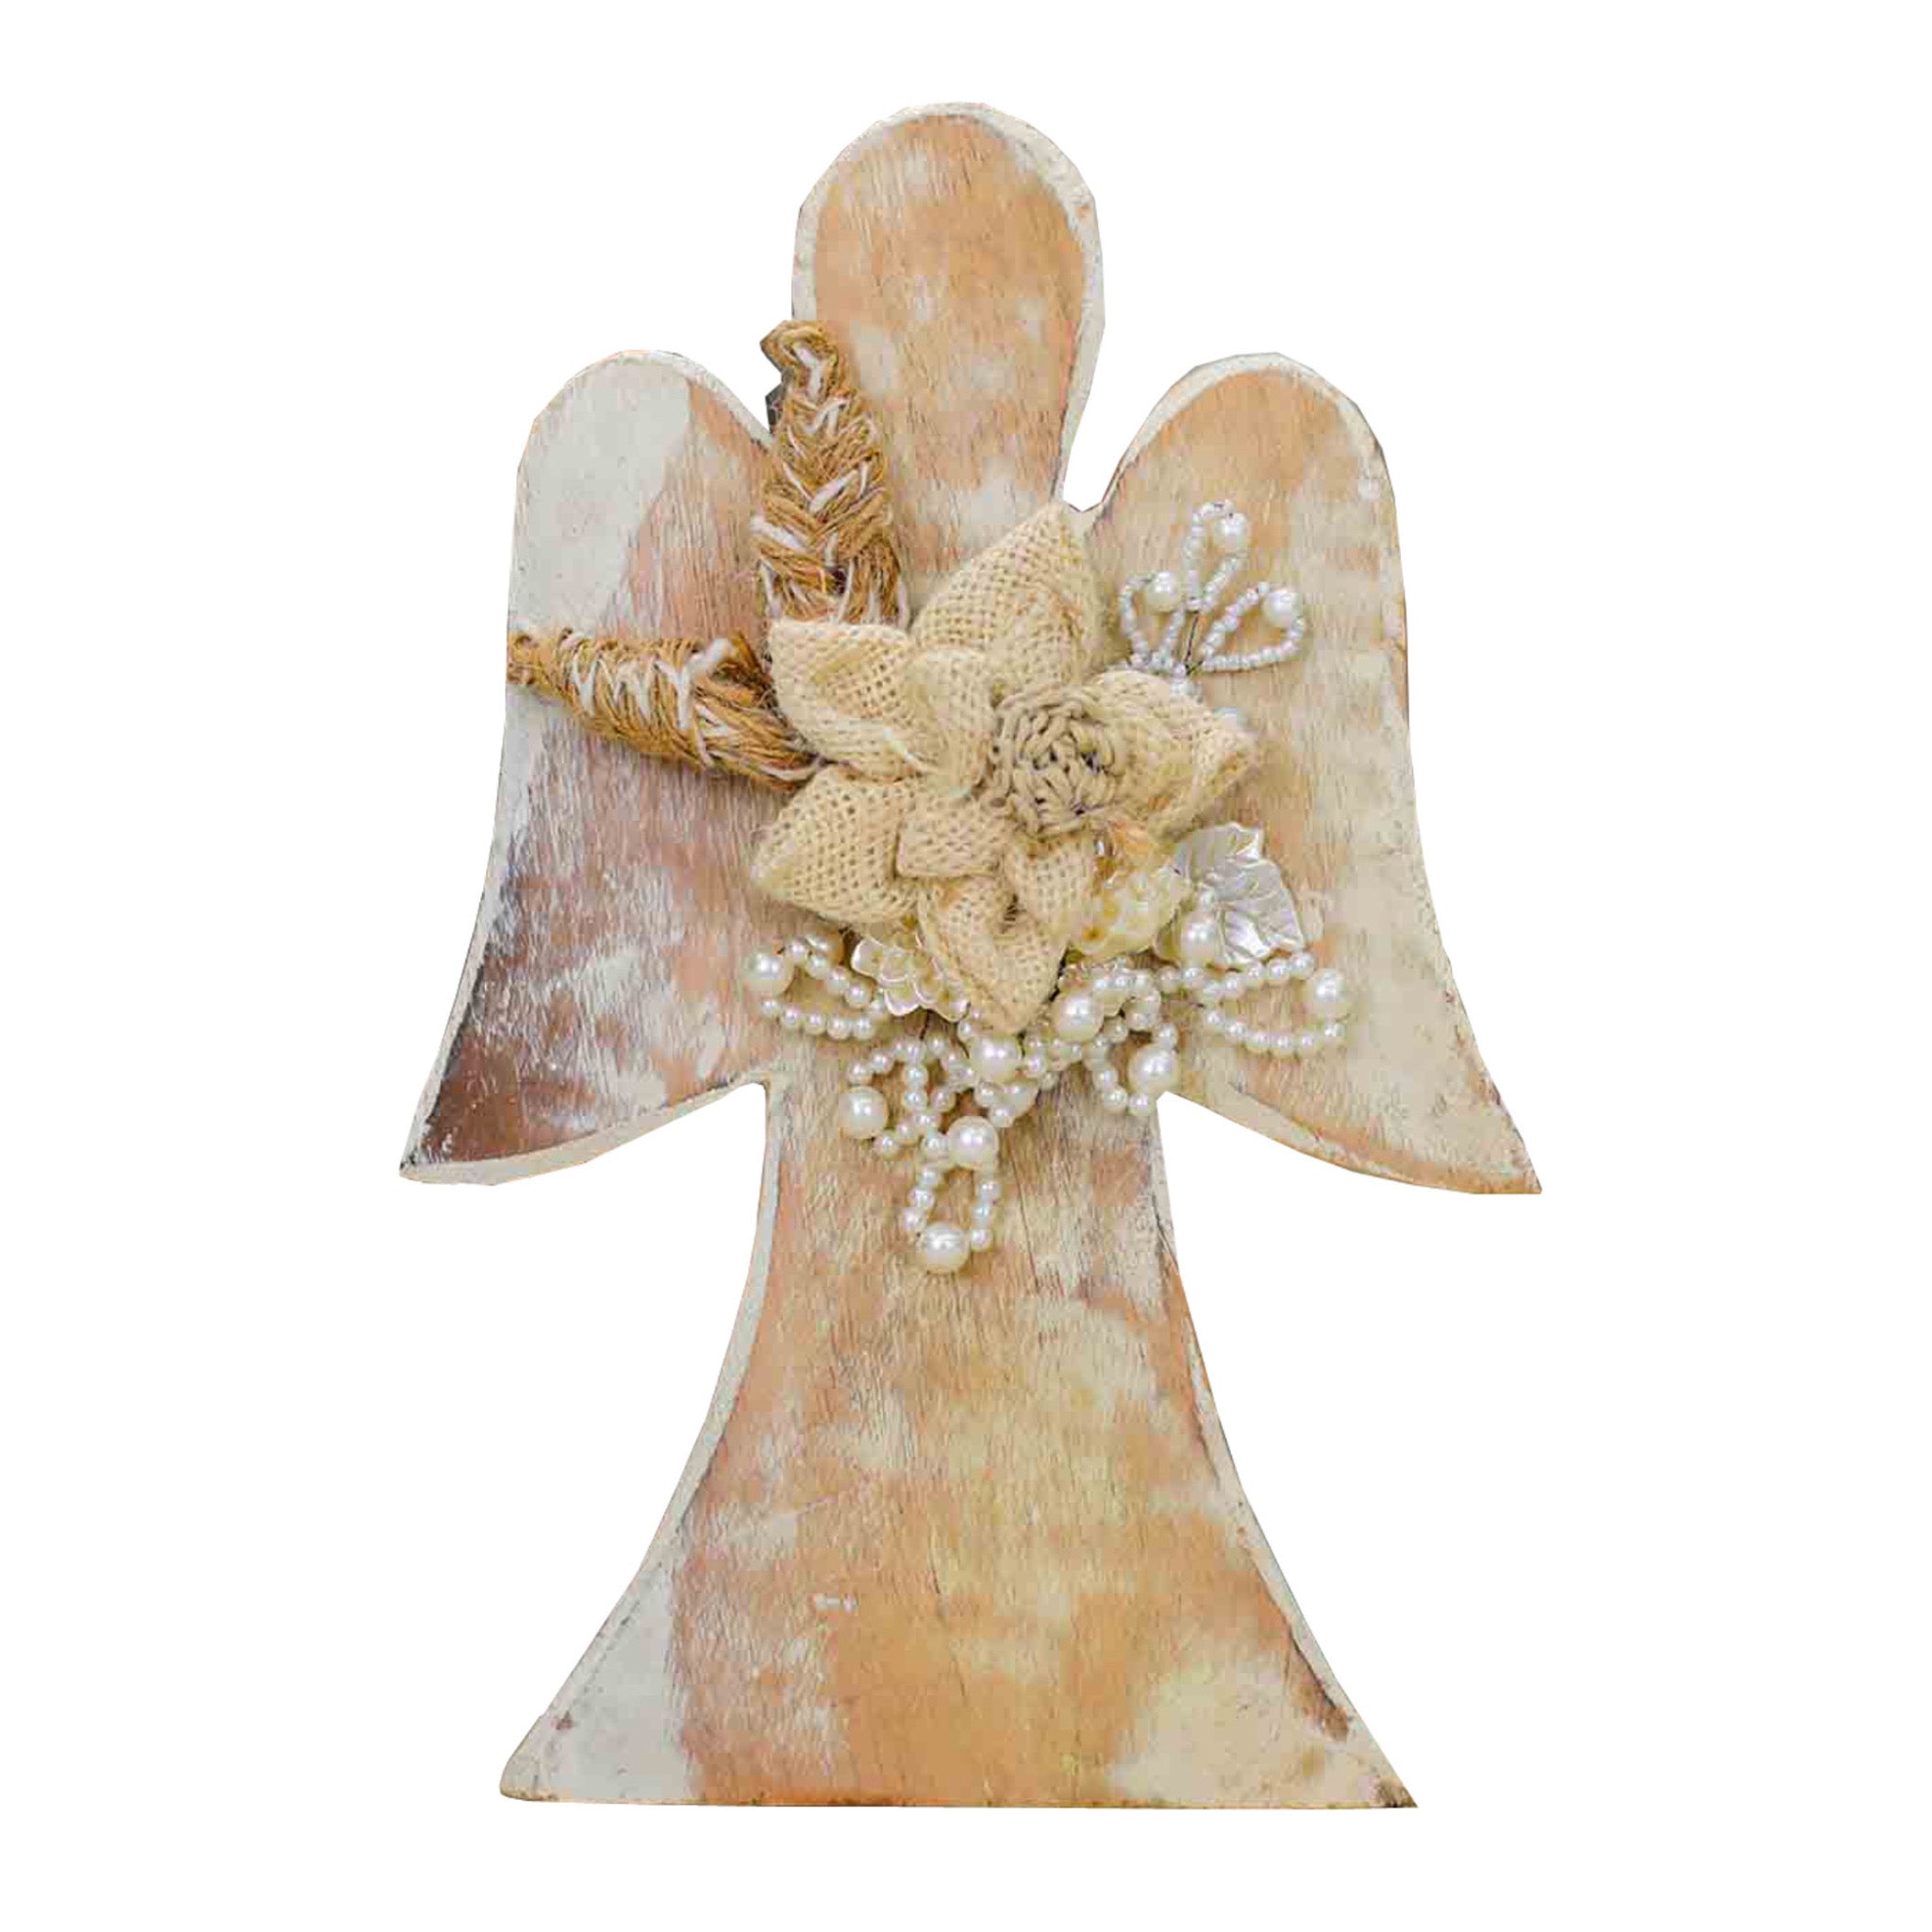 Earth Angel Wood Sculpture in Cream & White